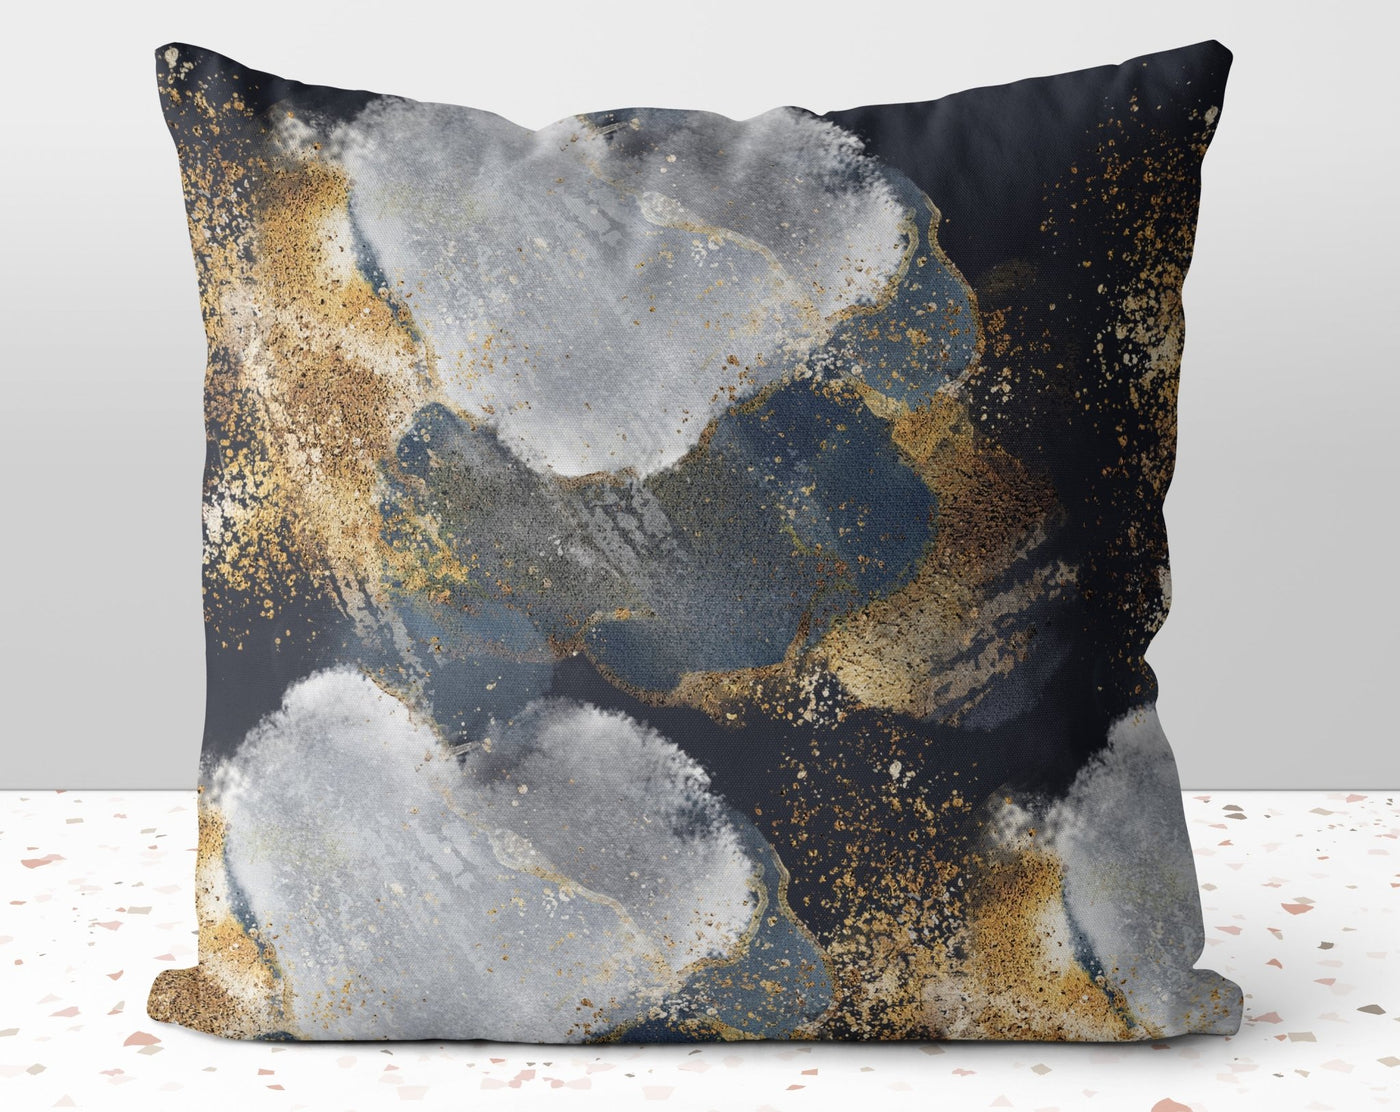 Glam + Chic Dark Gray with Gold Printed Accents Pillow Throw Cover with Insert - Cush Potato Pillows